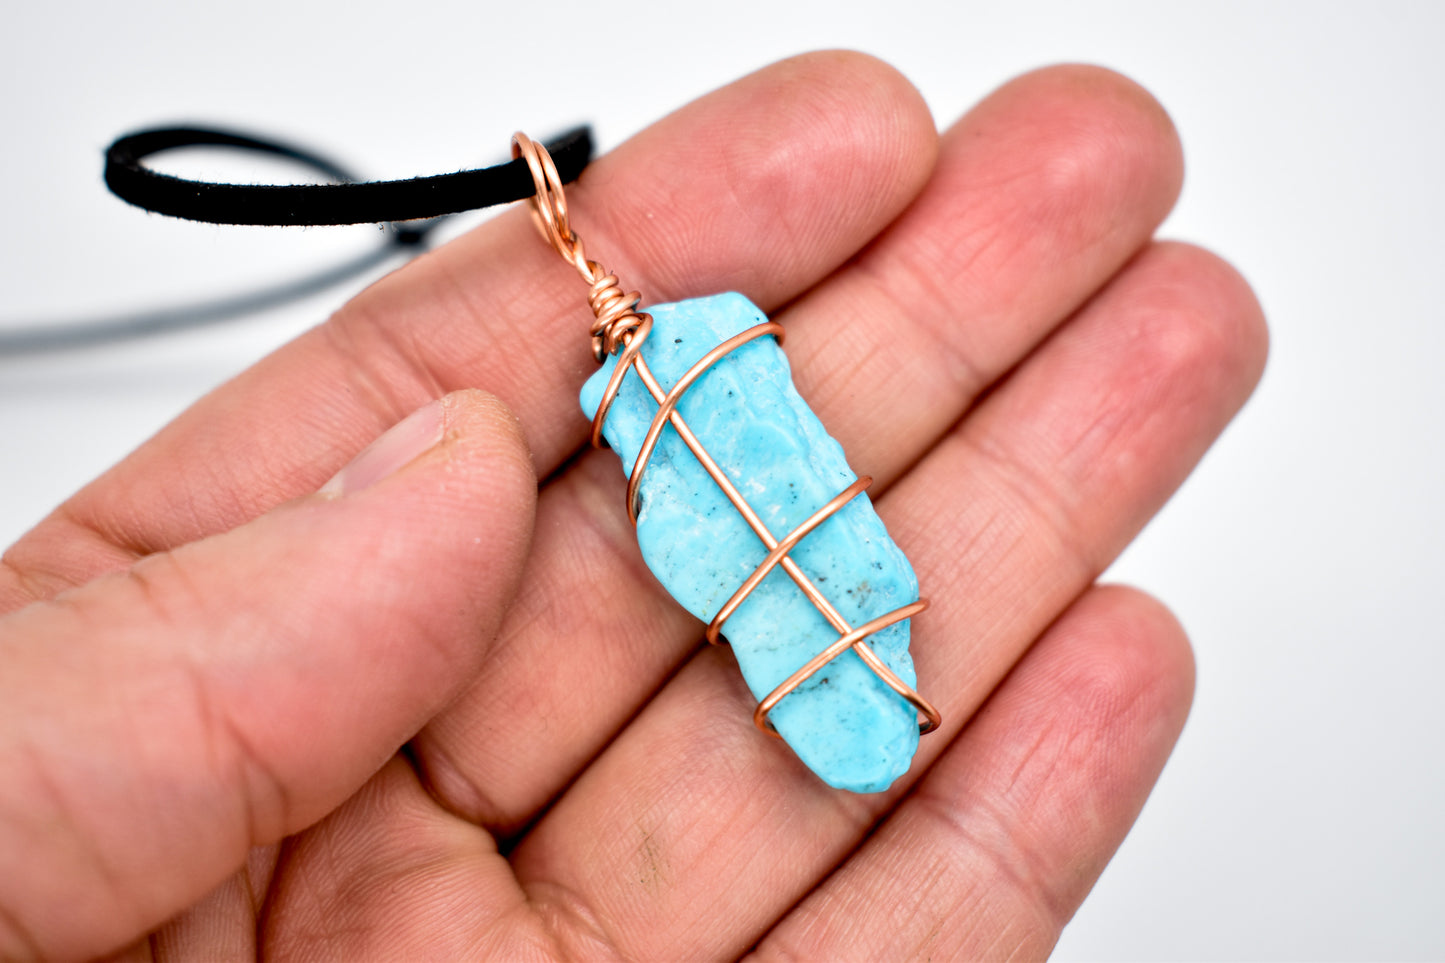 Copper Wrapped Turquoise Necklace